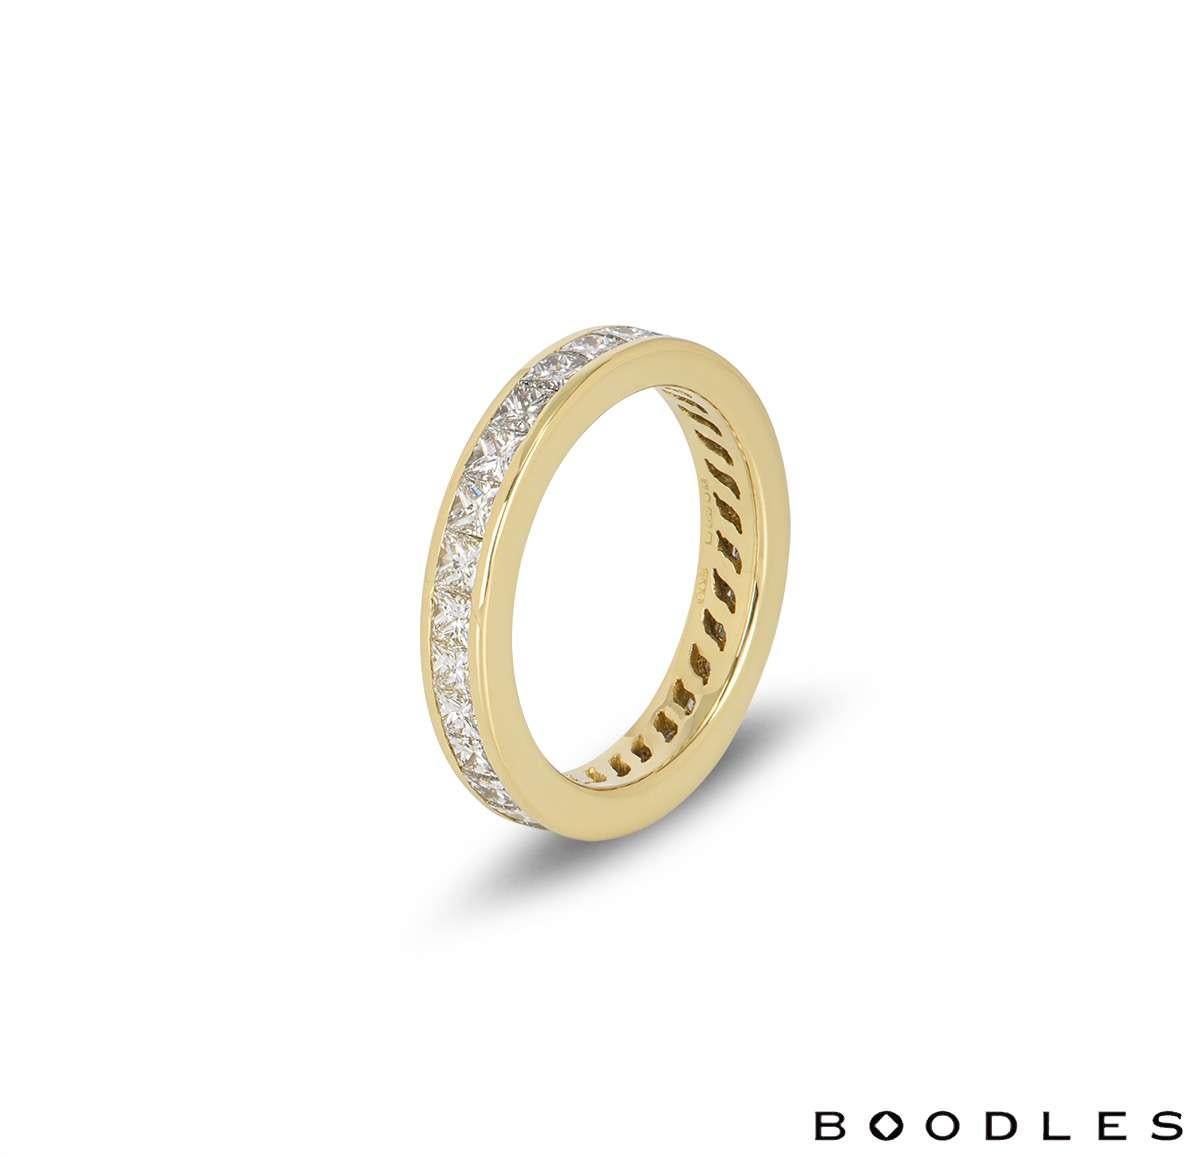 An 18k yellow gold full eternity ring by Boodles. The ring is set with 28 princess cut diamonds with a total diamond weight of approximately 2.24ct. The ring measures 3.4mm in width and is a size UK K - EU 50 - US 5.25, with a gross weight of 3.8